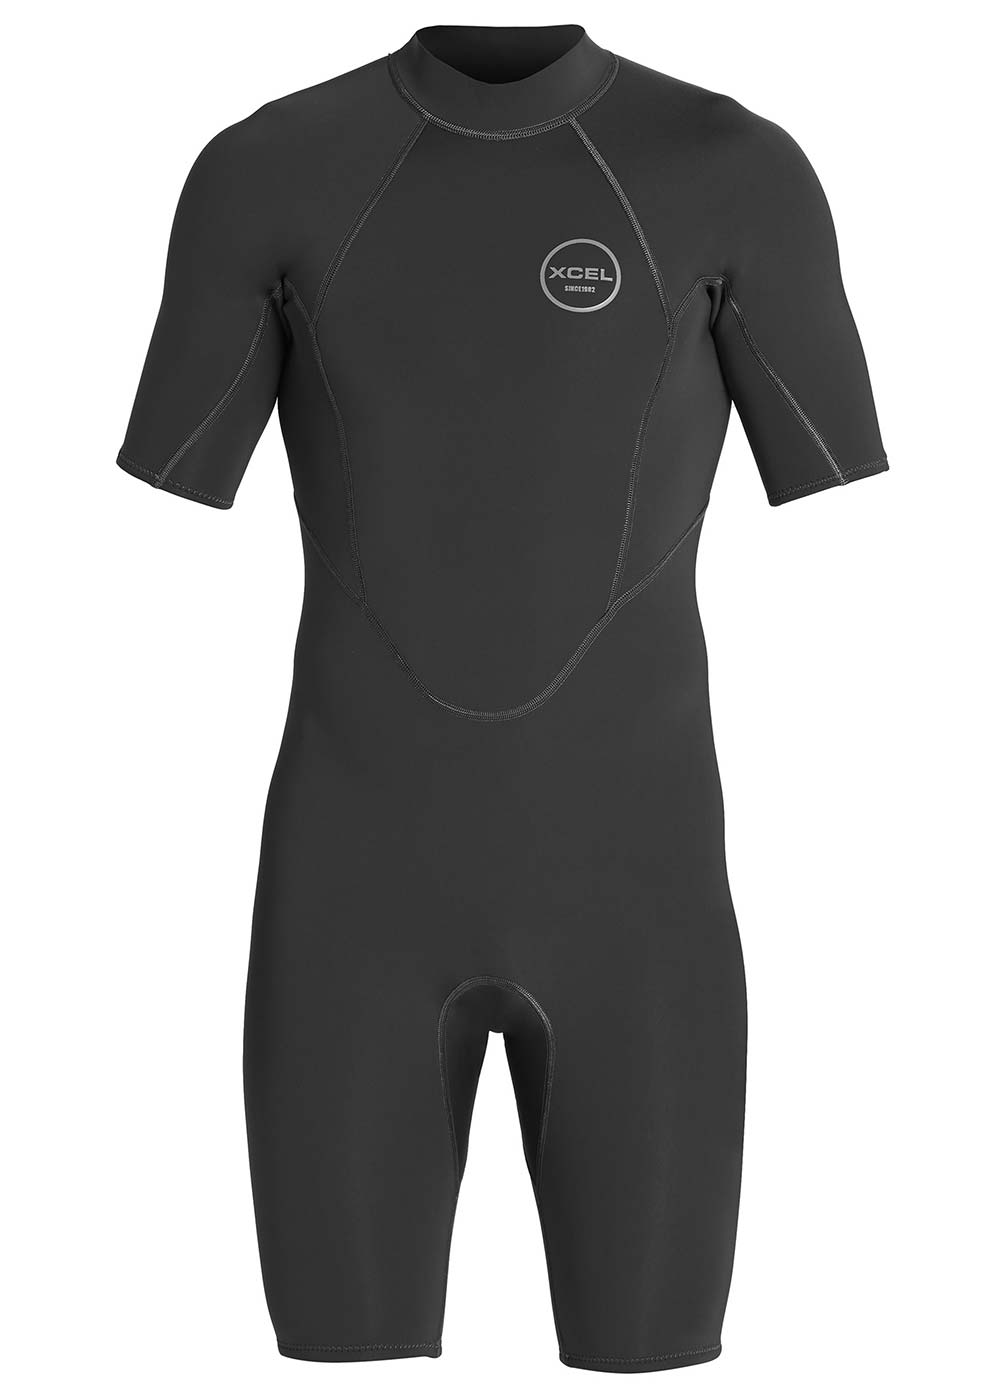 Xcel Mens Wetsuit Axis 2mm Spring Suit - MN210AX9 - Buy online with Australia's best Wetty shop